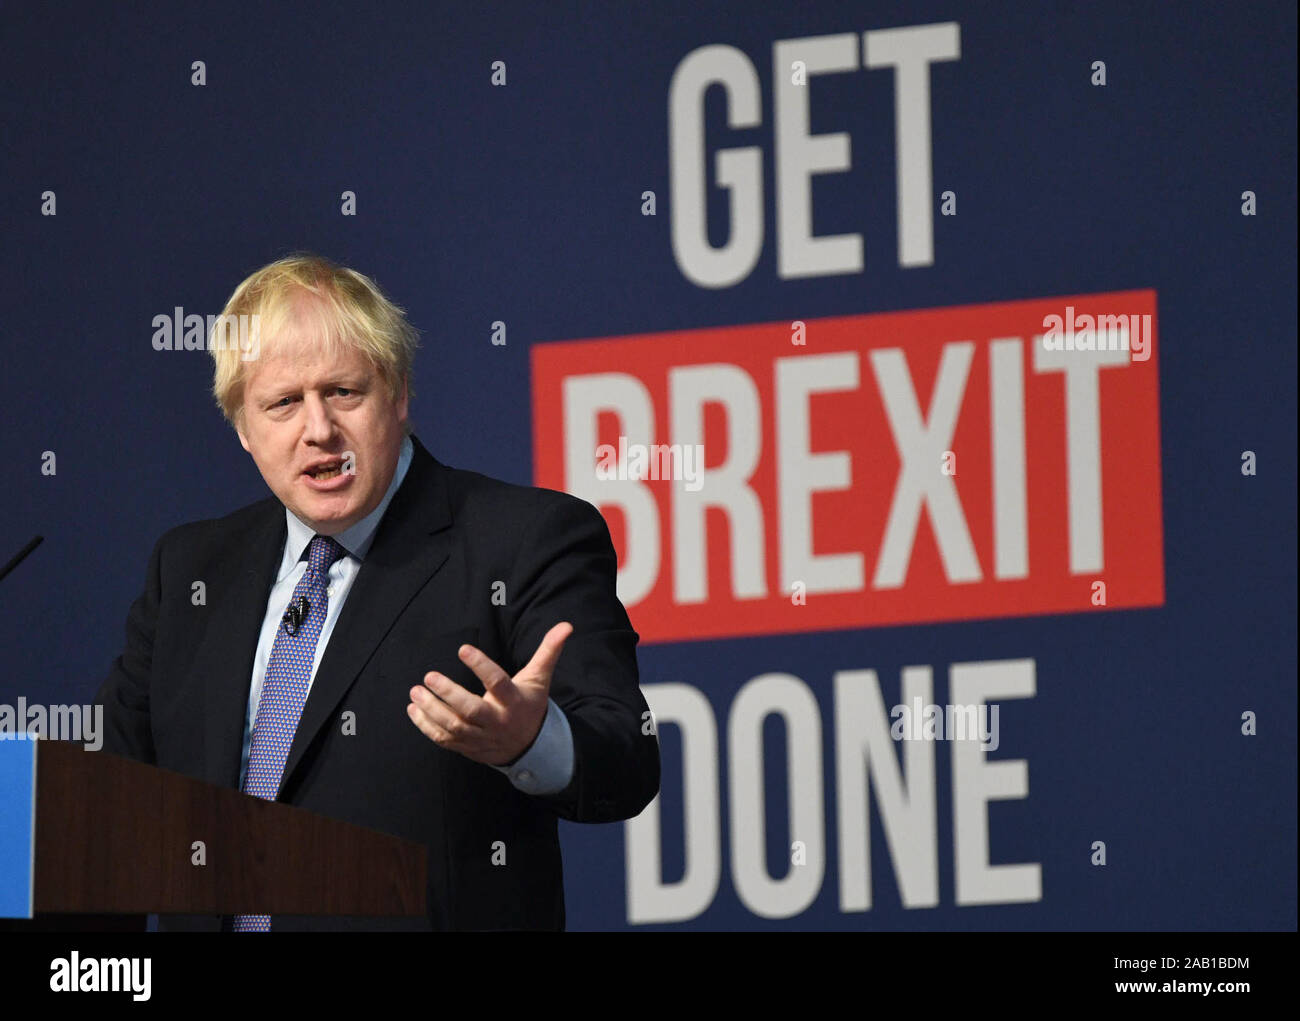 Telford. 24th Nov, 2019. British Prime Minister Boris Johnson delivers a speech at the launch of the Conservative Party election manifesto in Telford, Britain on Nov. 24, 2019. British Prime Minister Boris Johnson launched the Conservative Party's election manifesto Sunday, promising to put his "Get Brexit Done" deal before parliament ahead of Christmas recess. Credit: Xinhua/Alamy Live News Stock Photo